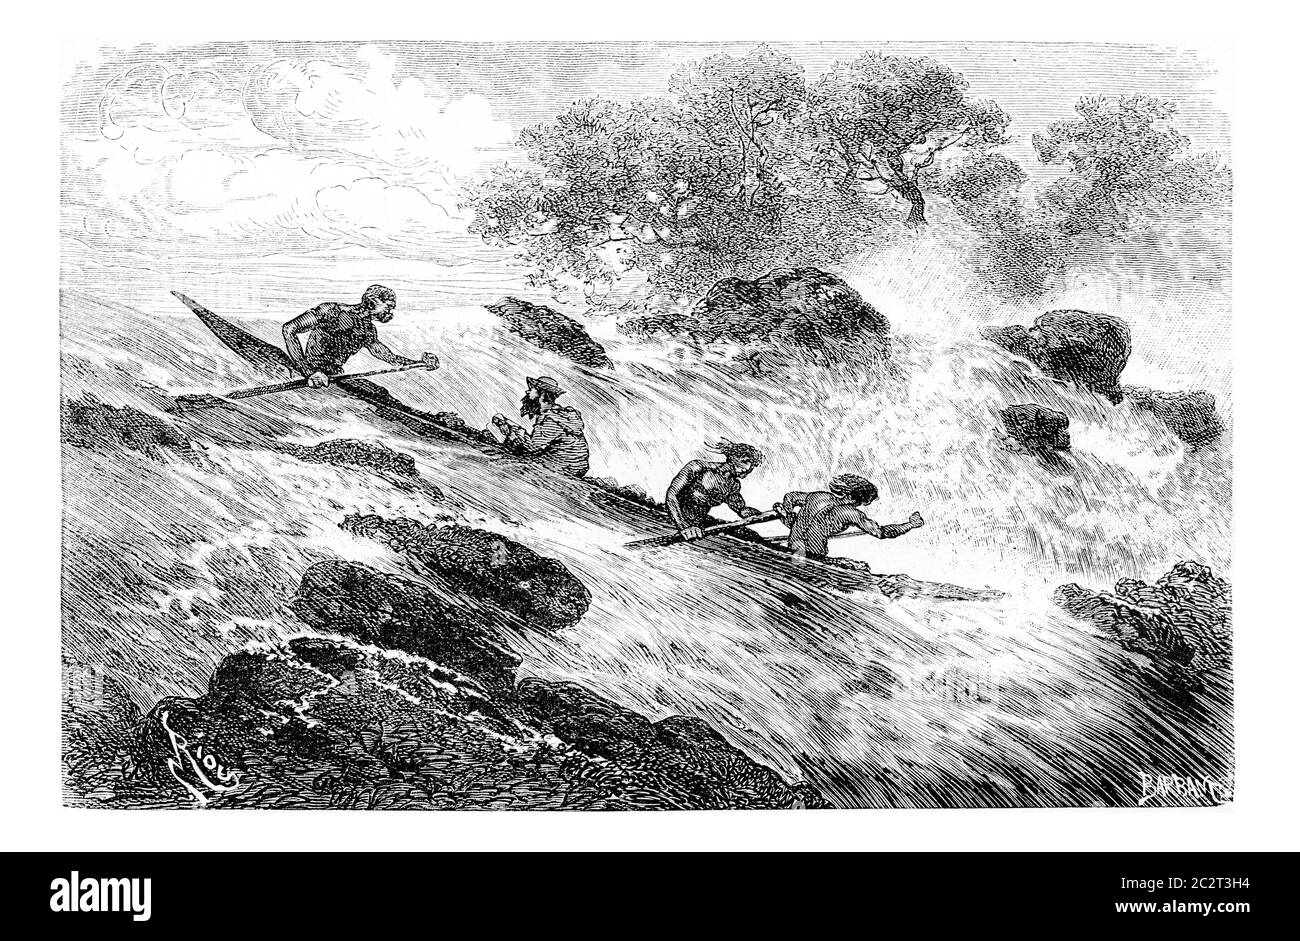 Navigating the Rapids in Oiapoque, Brazil, drawing by Riou from a sketch by Dr. Crevaux, vintage engraved illustration. Le Tour du Monde, Travel Journ Stock Photo